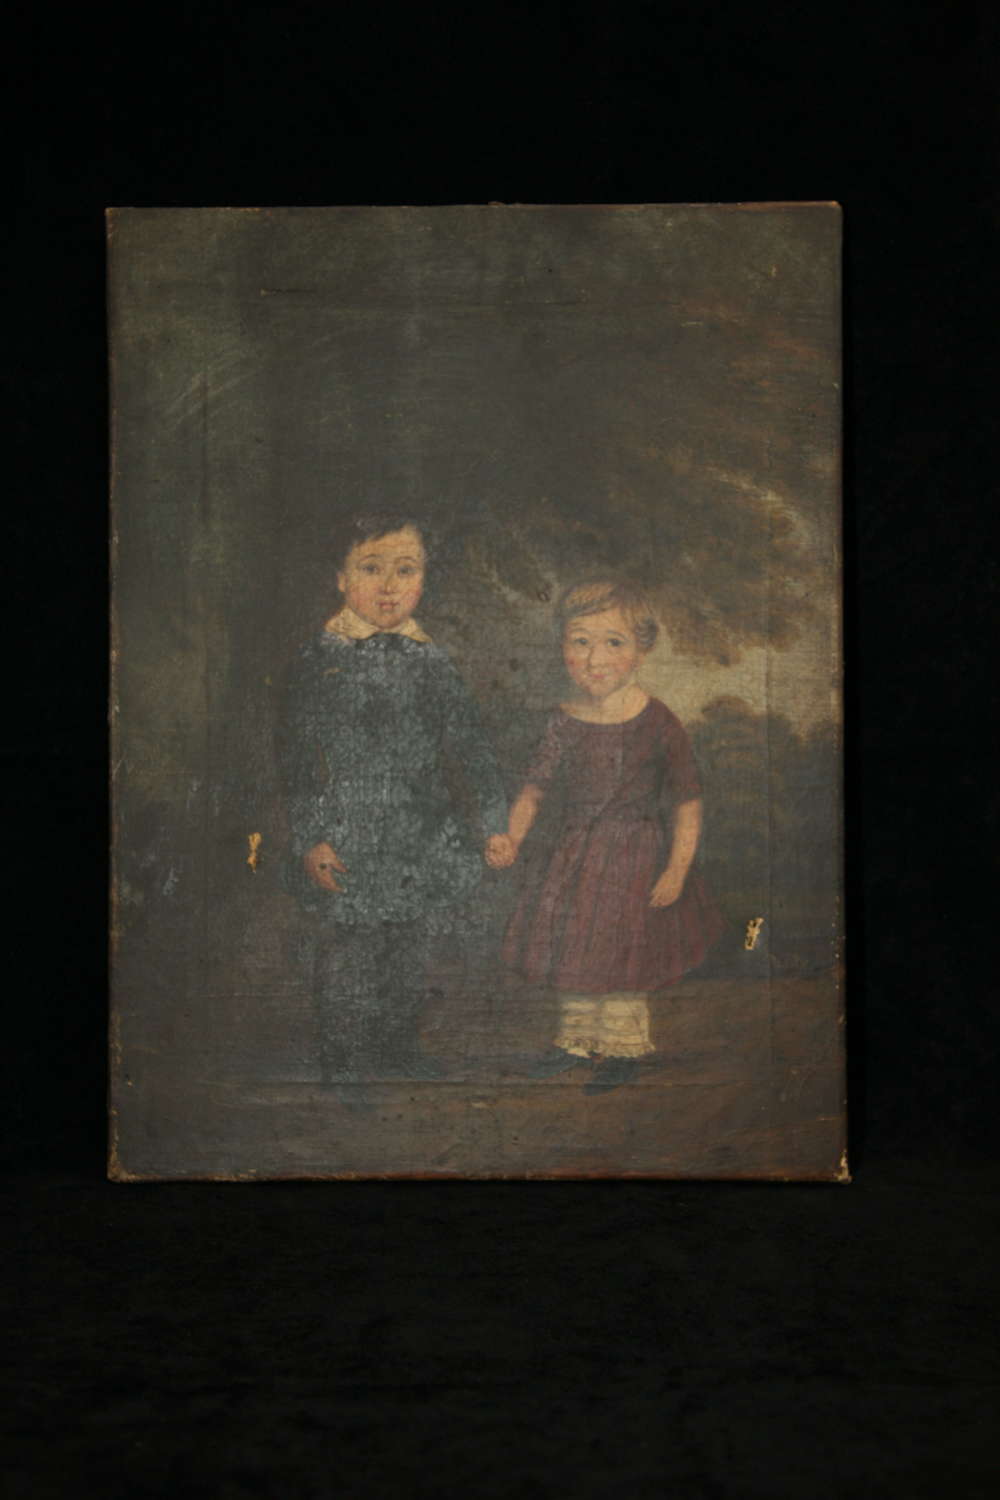 Brother & Sister Naive unframed Oil on canvas c.1830.